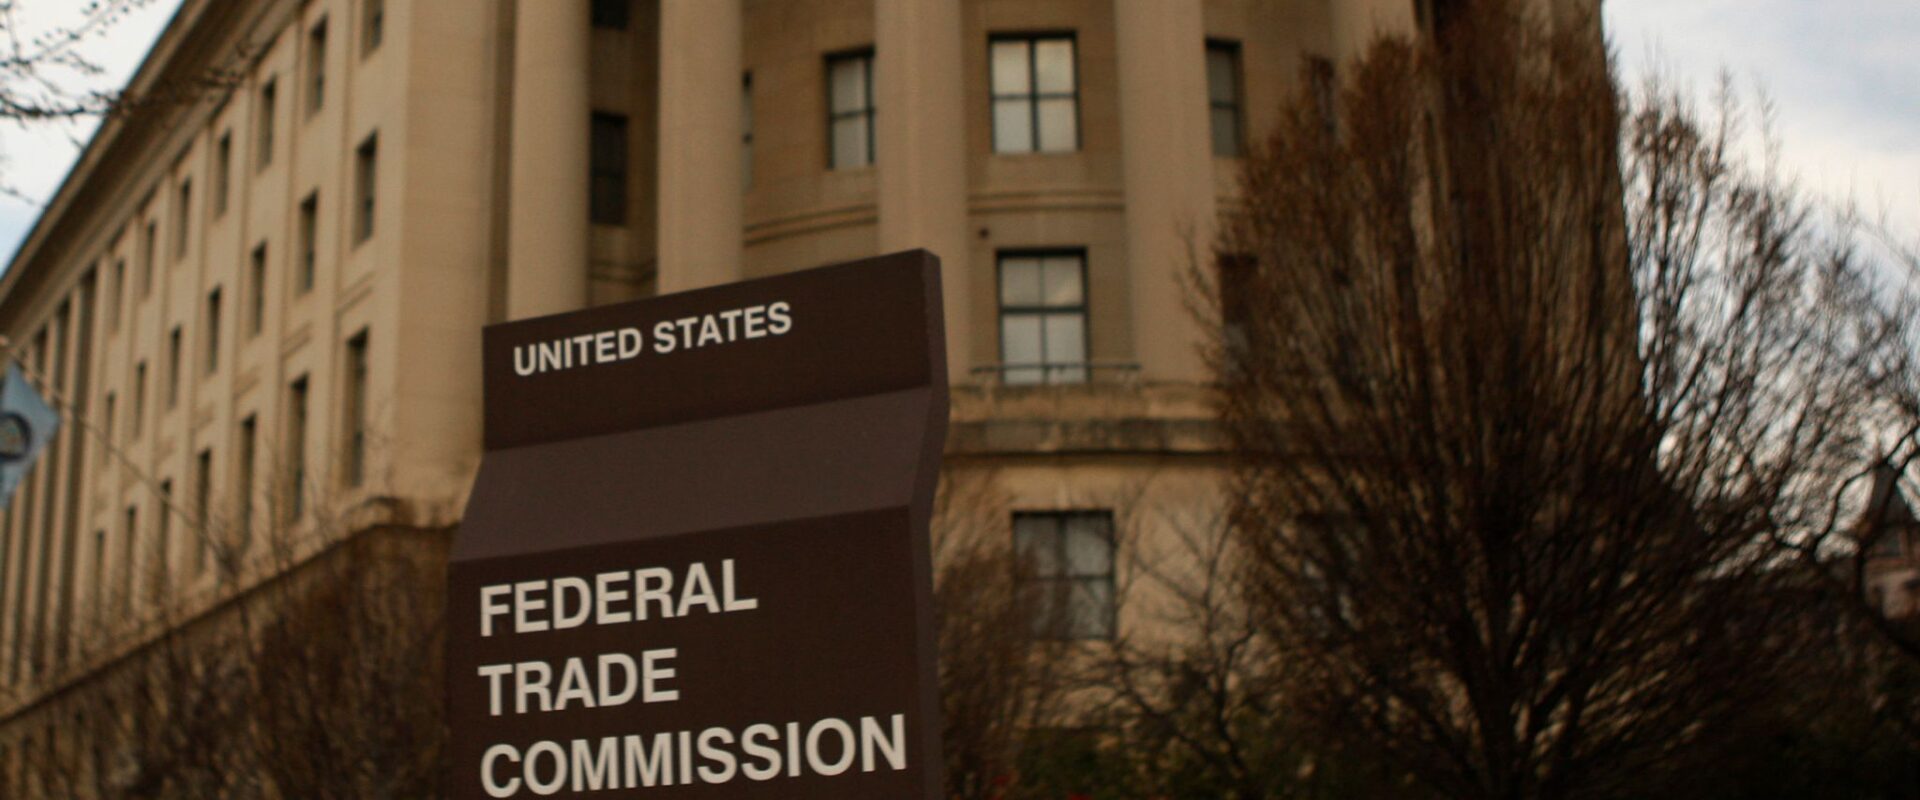 The Federal Trade Commission Investigates ChatGPT